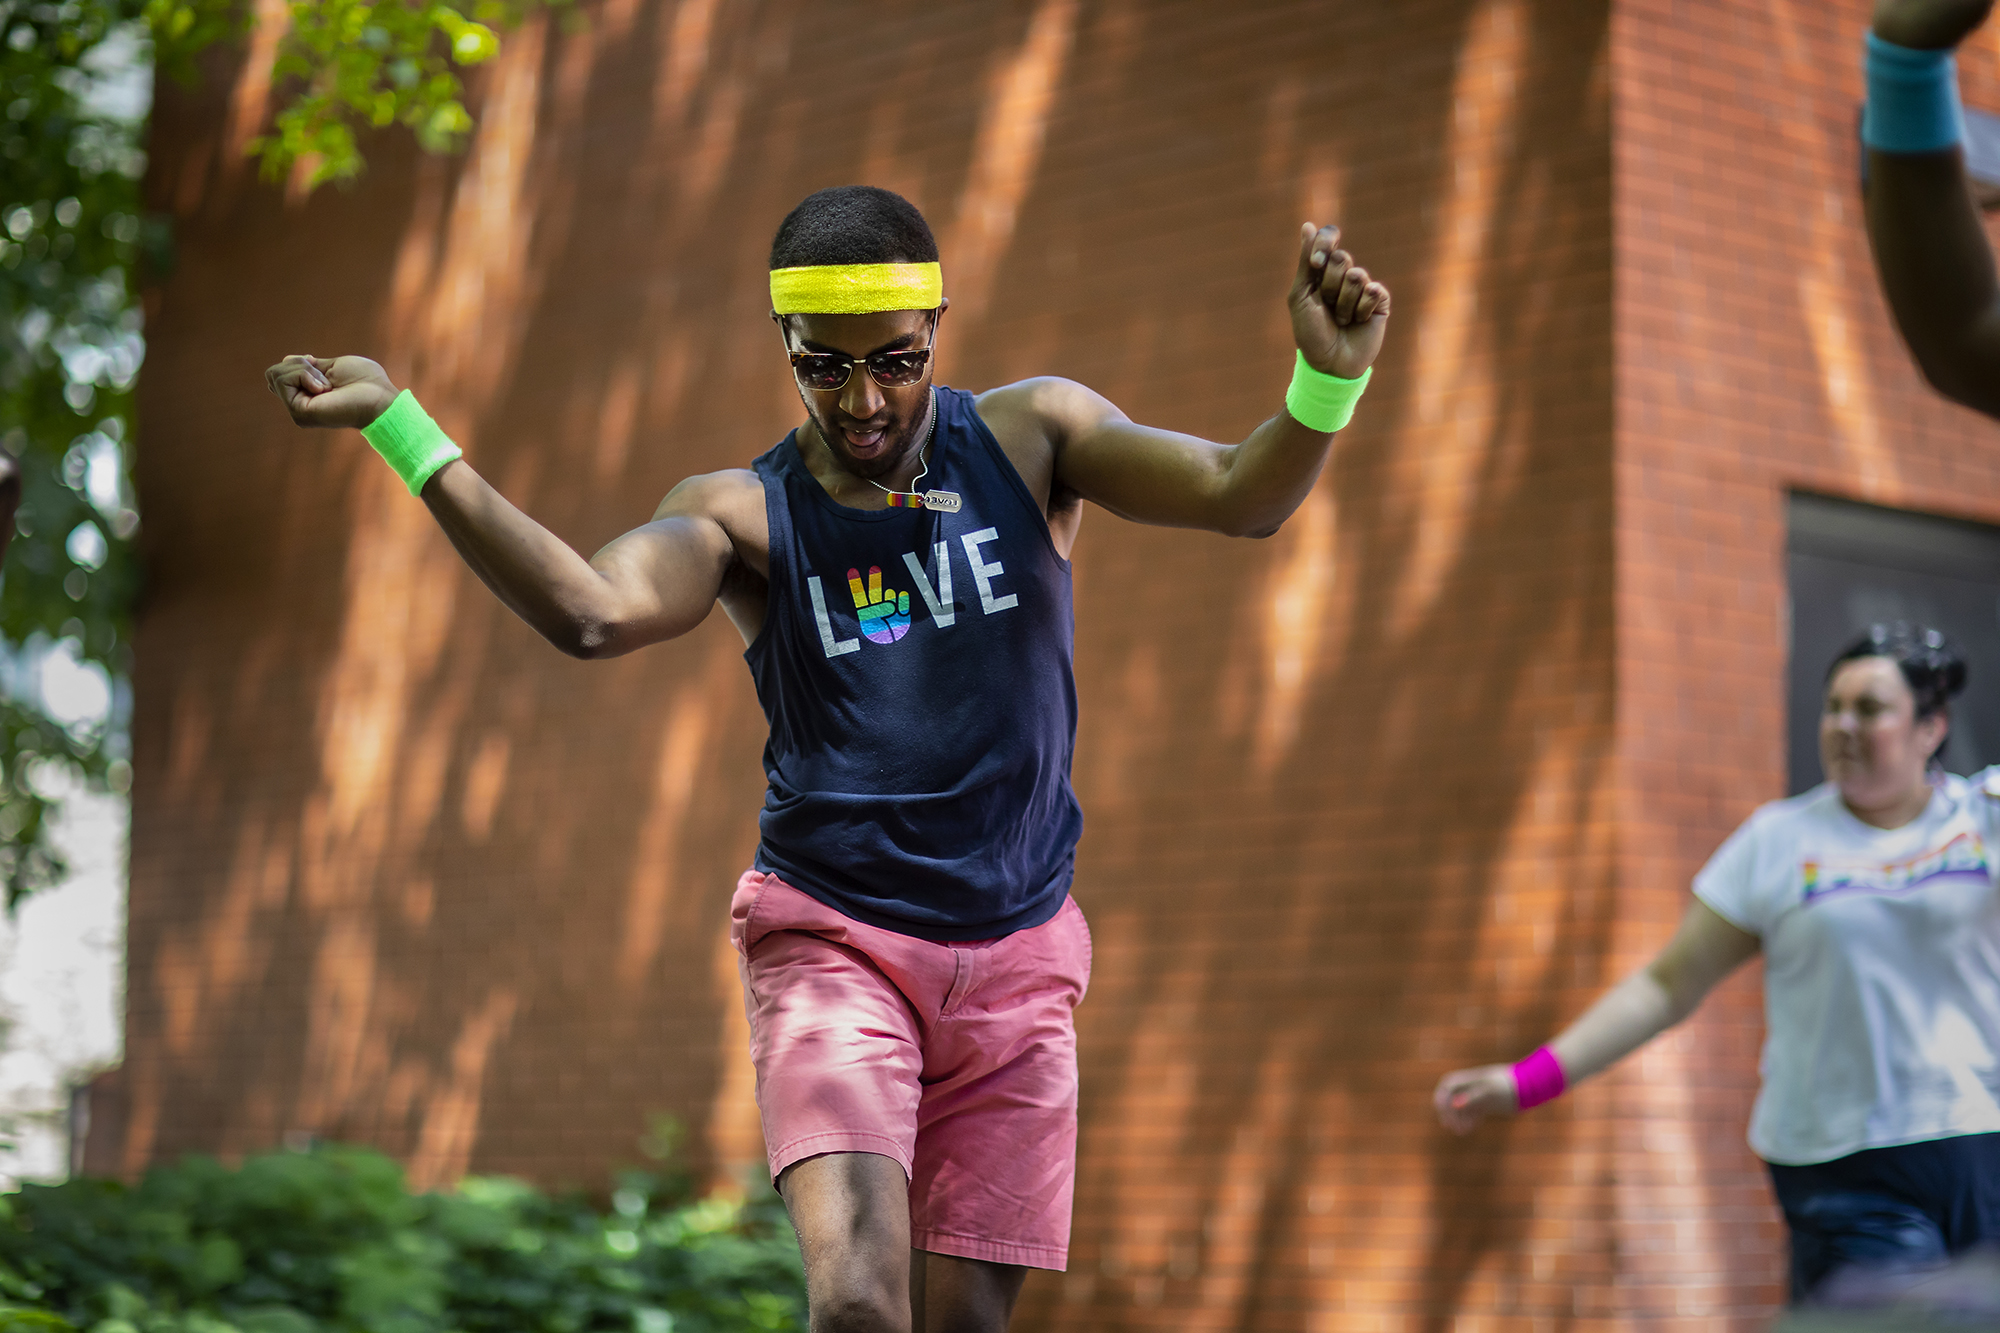 A person wearing a sweatband and wristbands dances outside in a Penn courtyard.